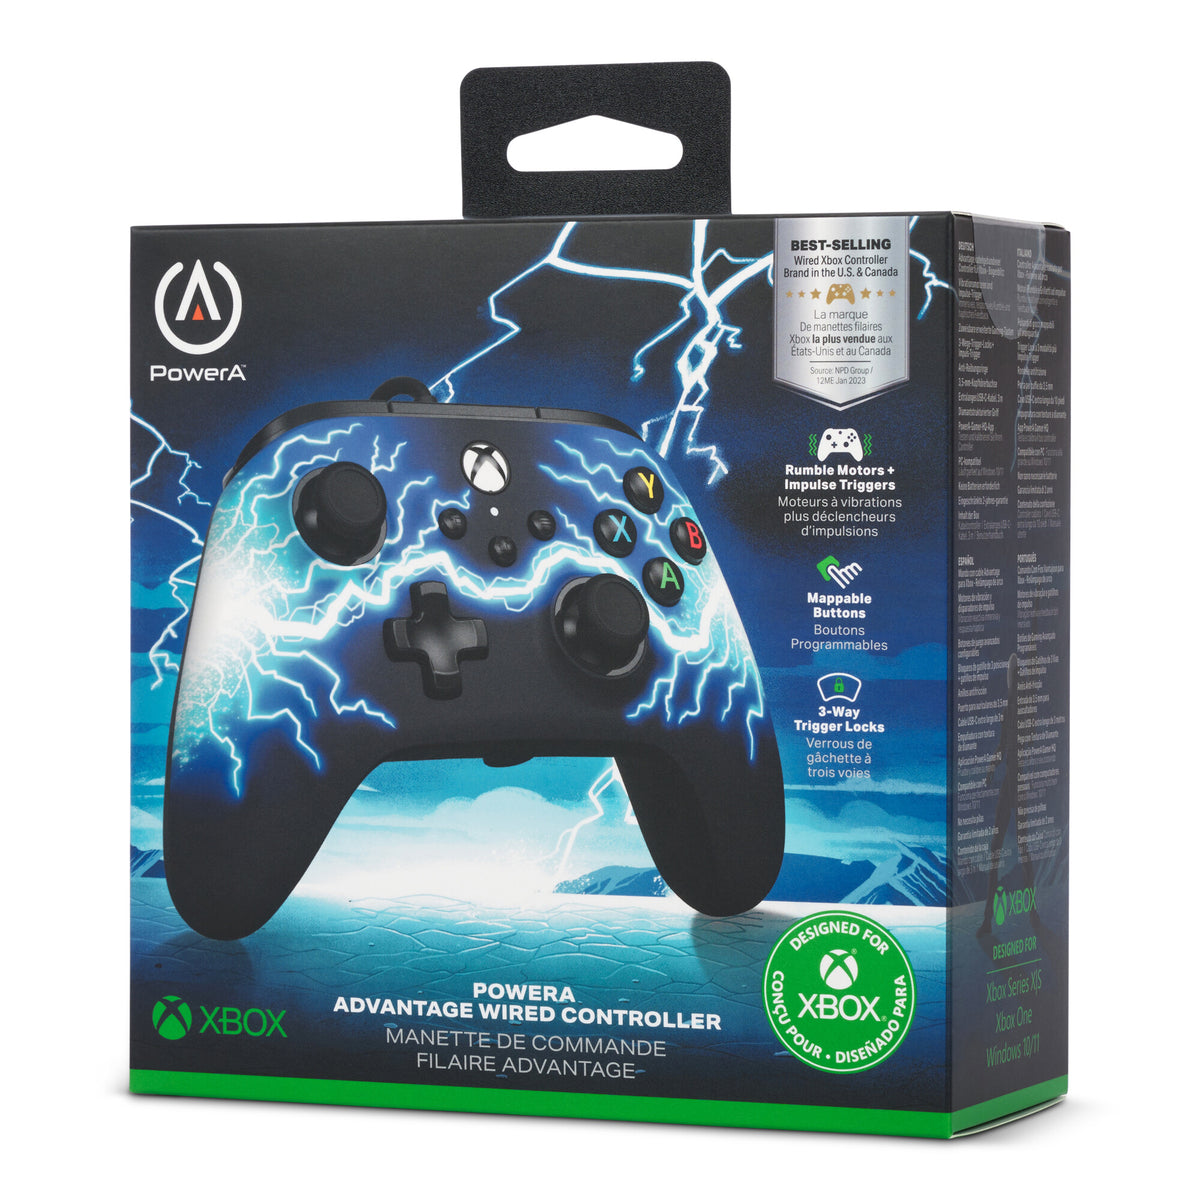 PowerA Advantage - USB Wired Gamepad for PC / Xbox Series X|S in Arc Lightning